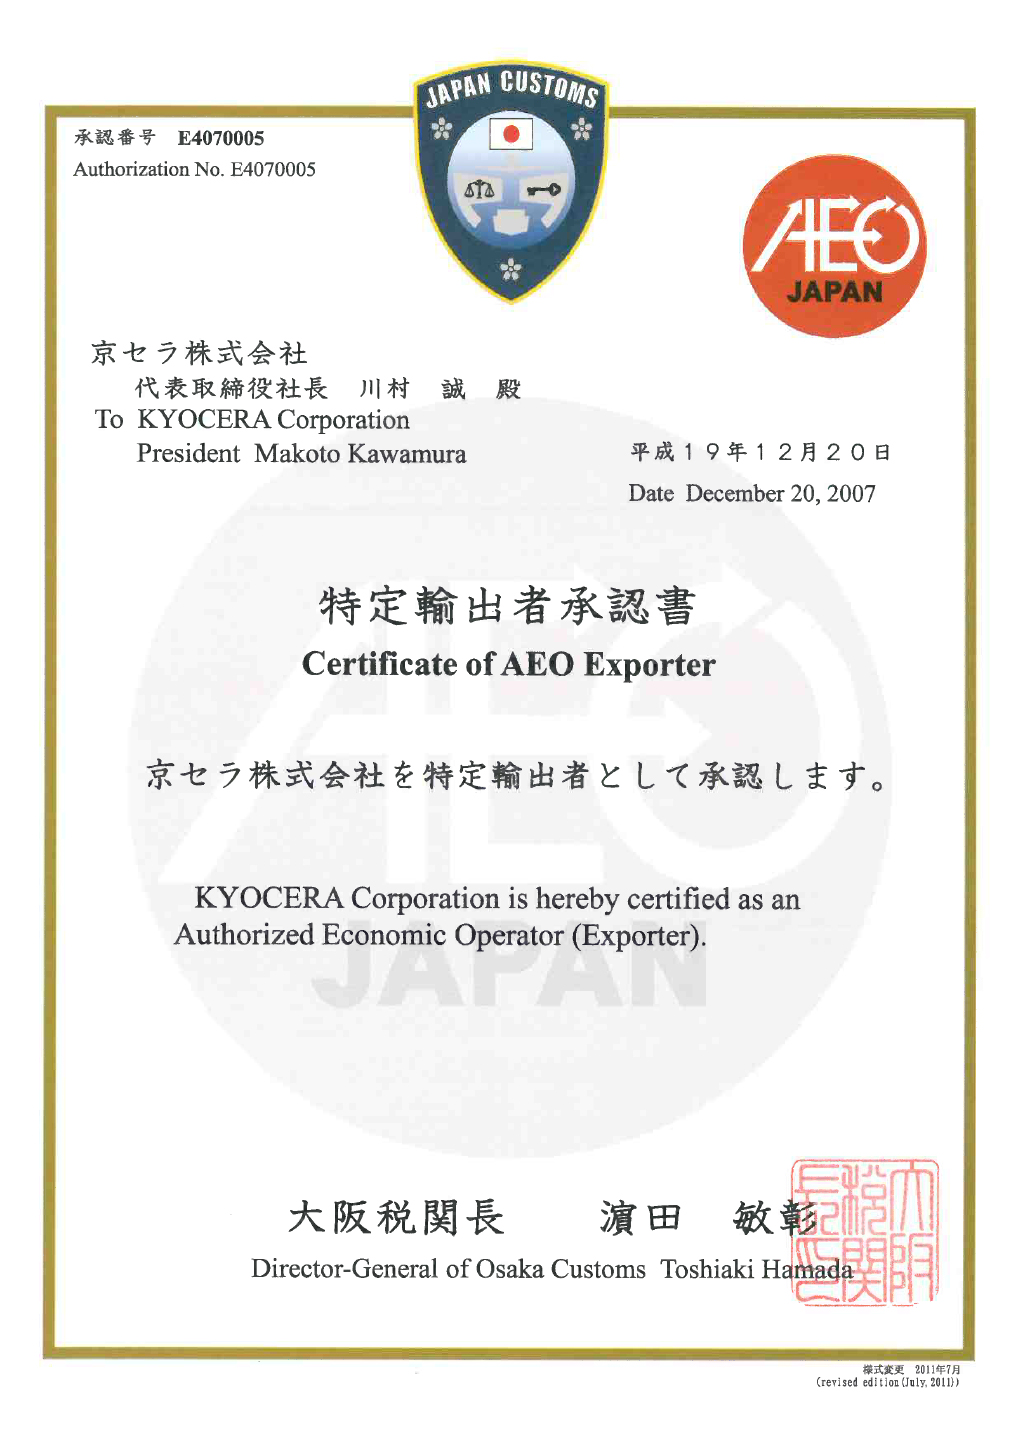 Image：Authorized exporter certificate